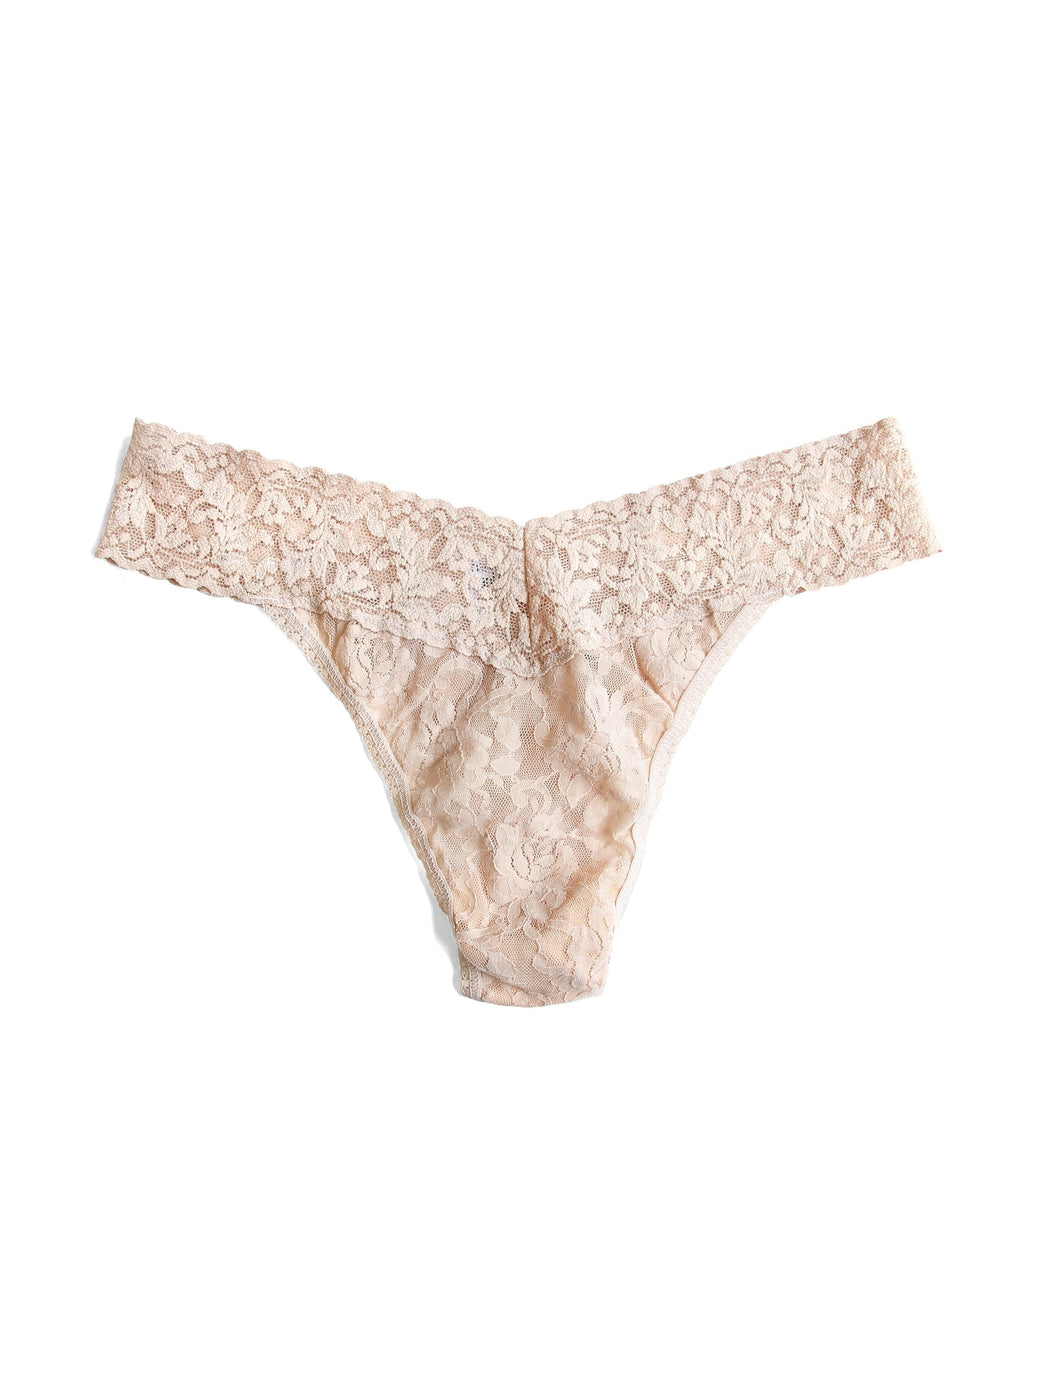 Hanky Panky Original Rise Thong Chai front view product image